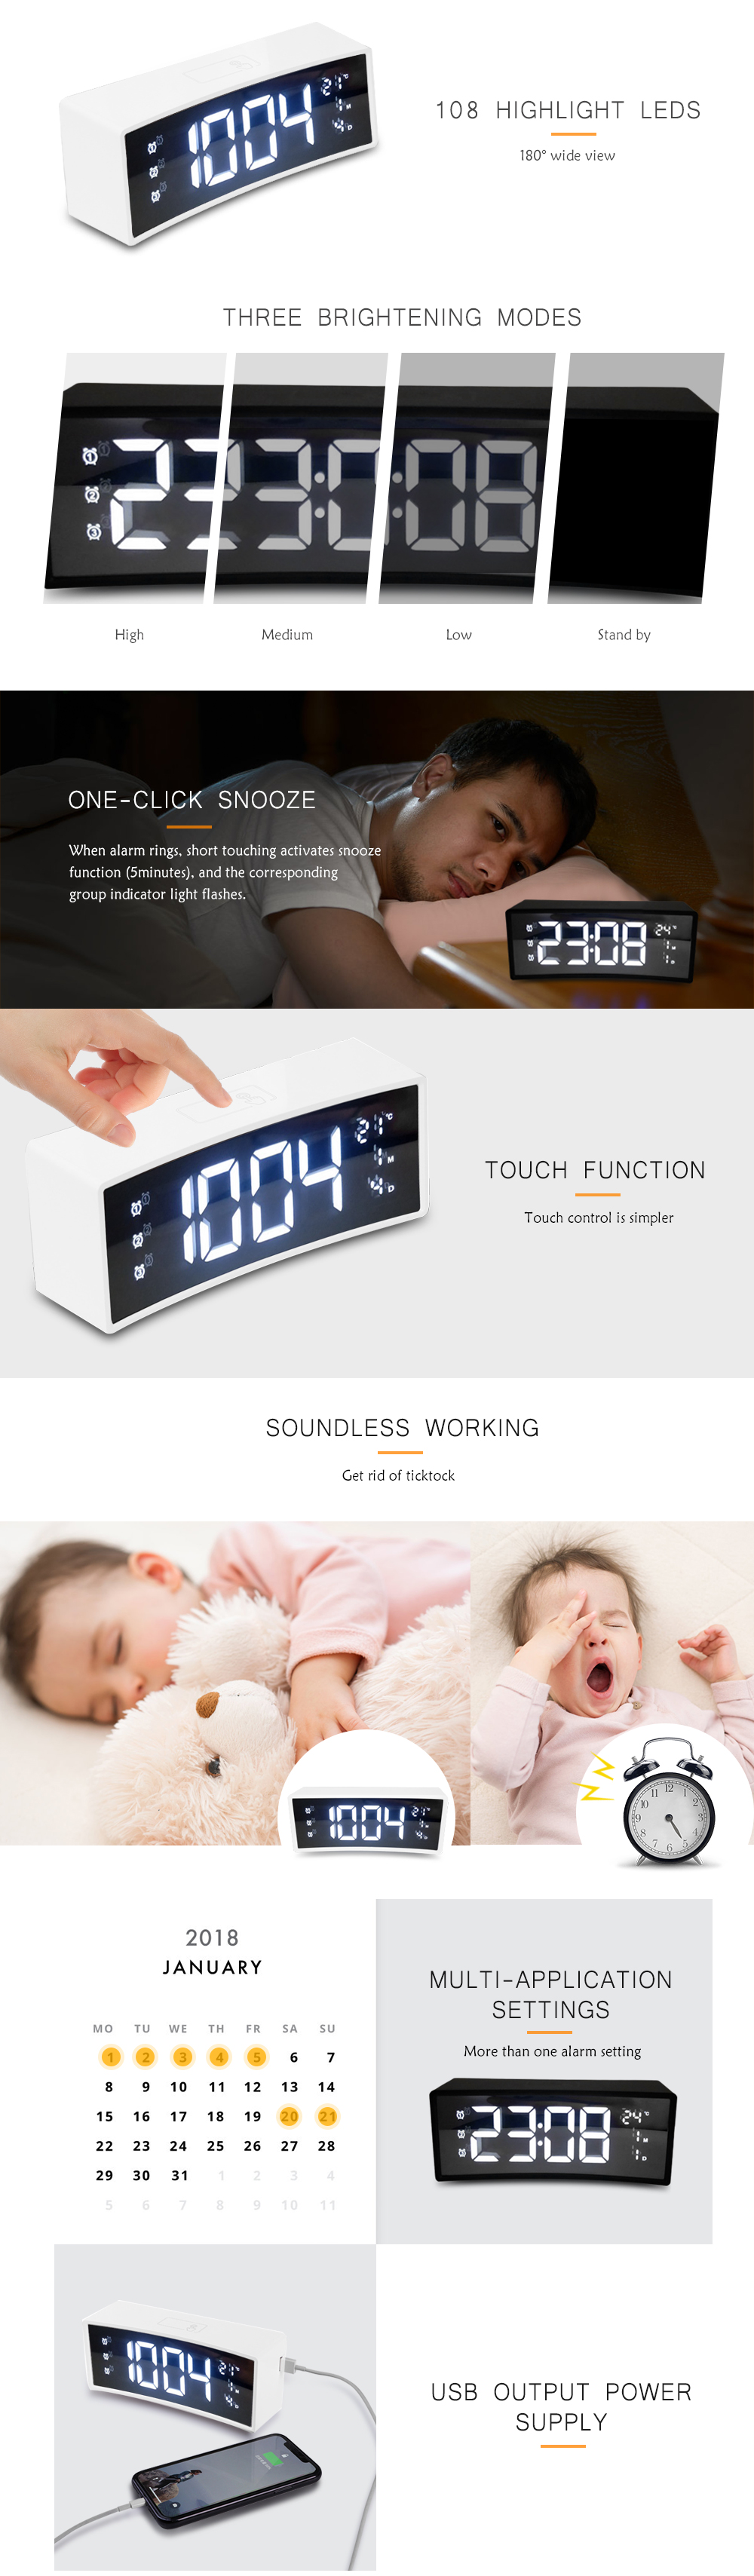 3D Curved Surface Screen Floating LED Display Smart Alarm Electronic Clock